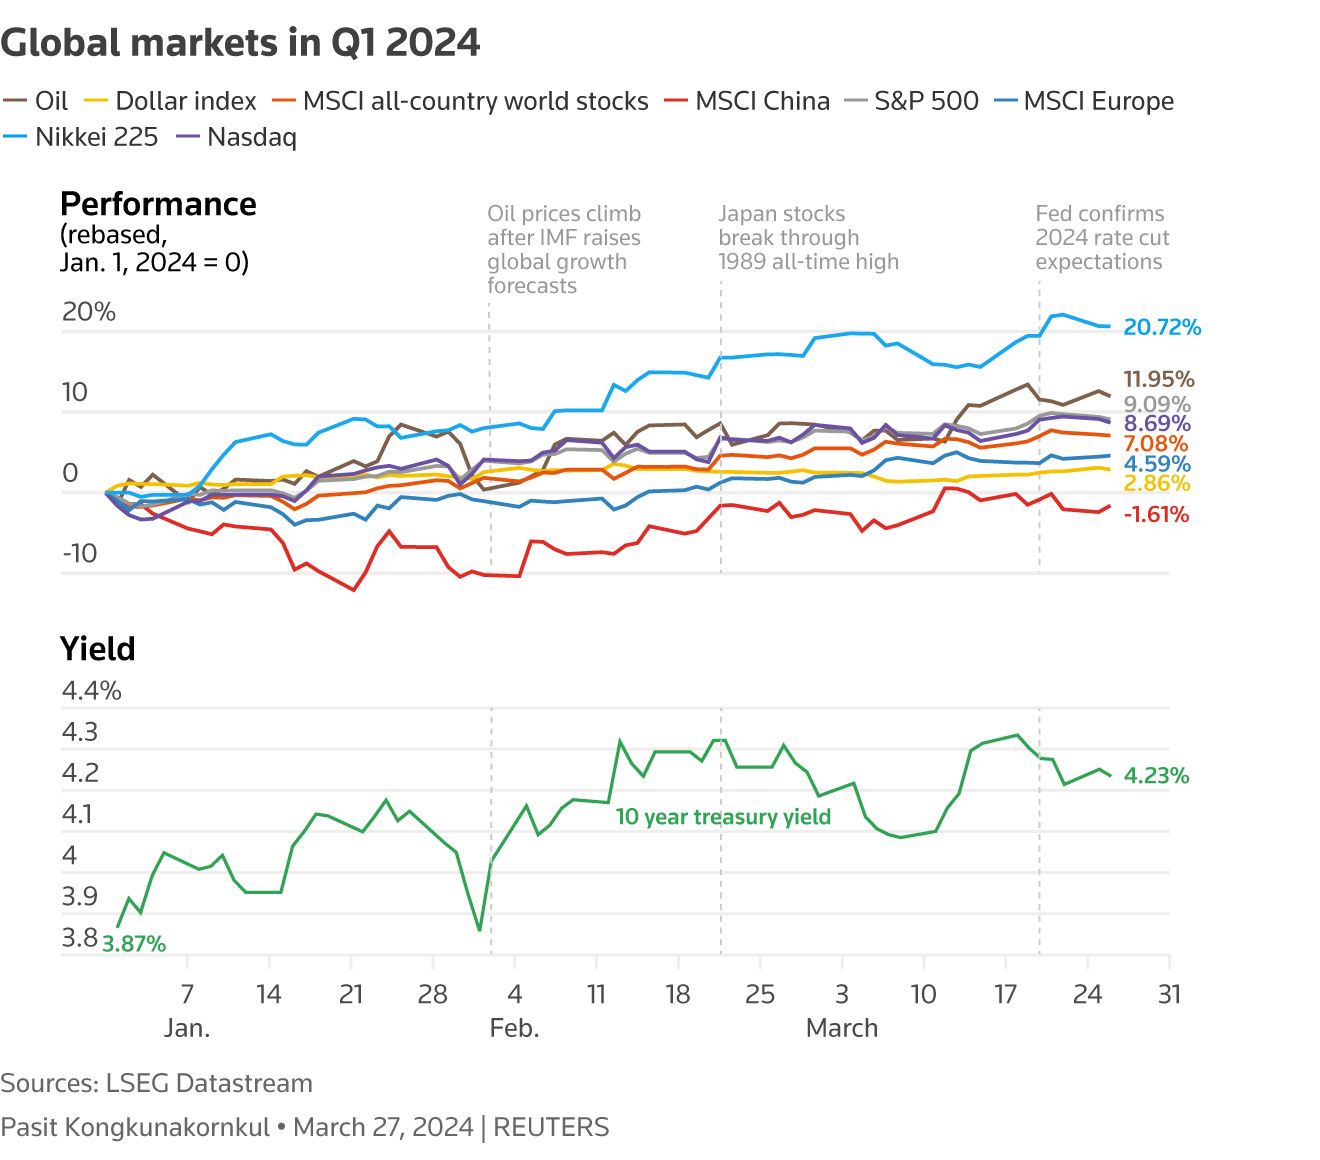 Global markets in Q1 2024